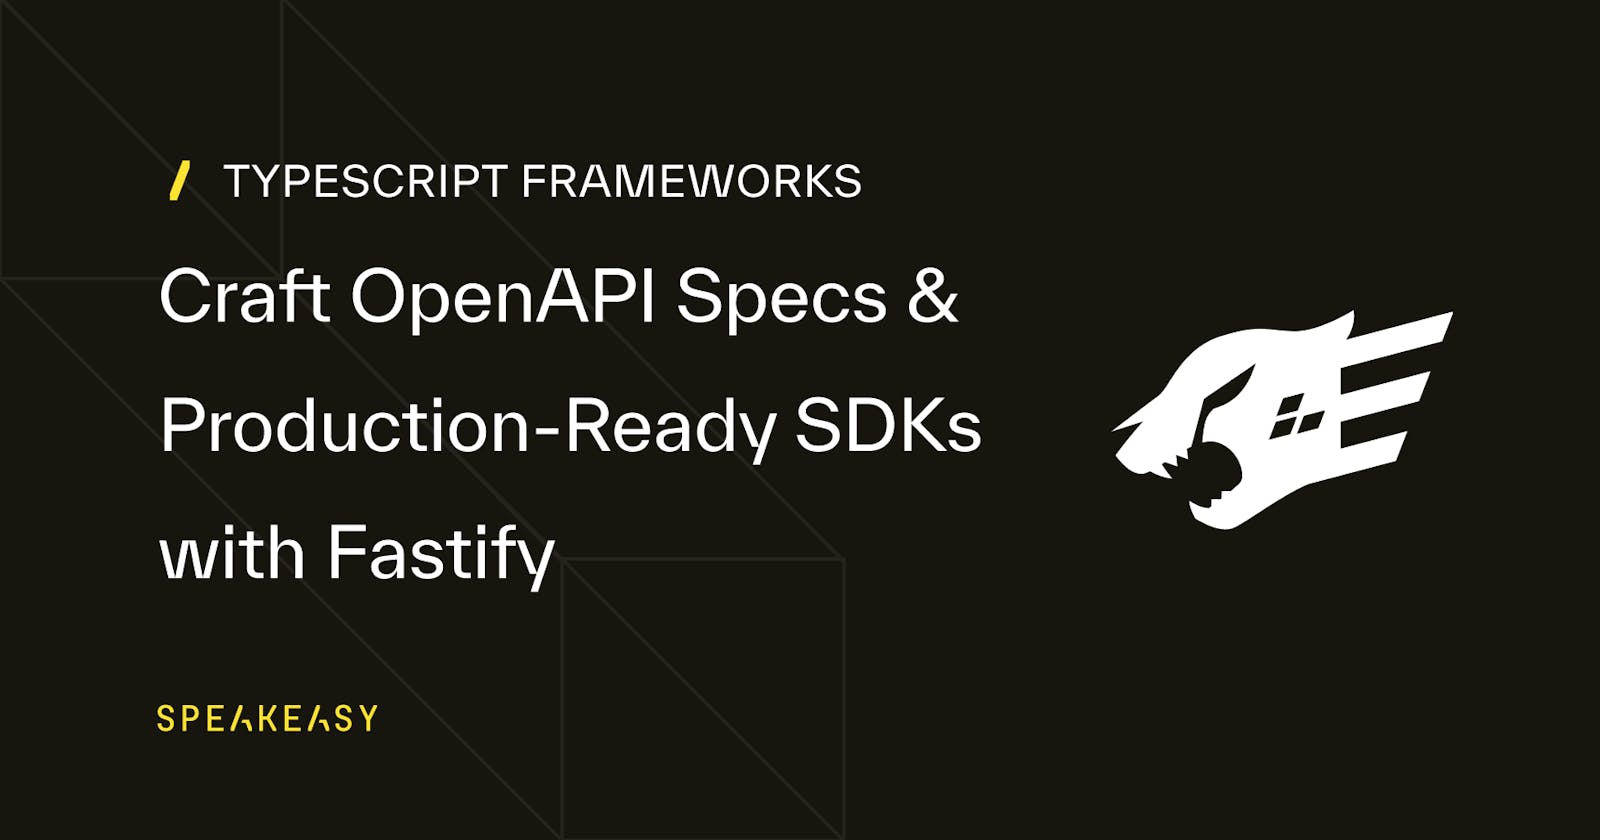 Craft OpenAPI Specs & Production-Ready SDKs with Fastify